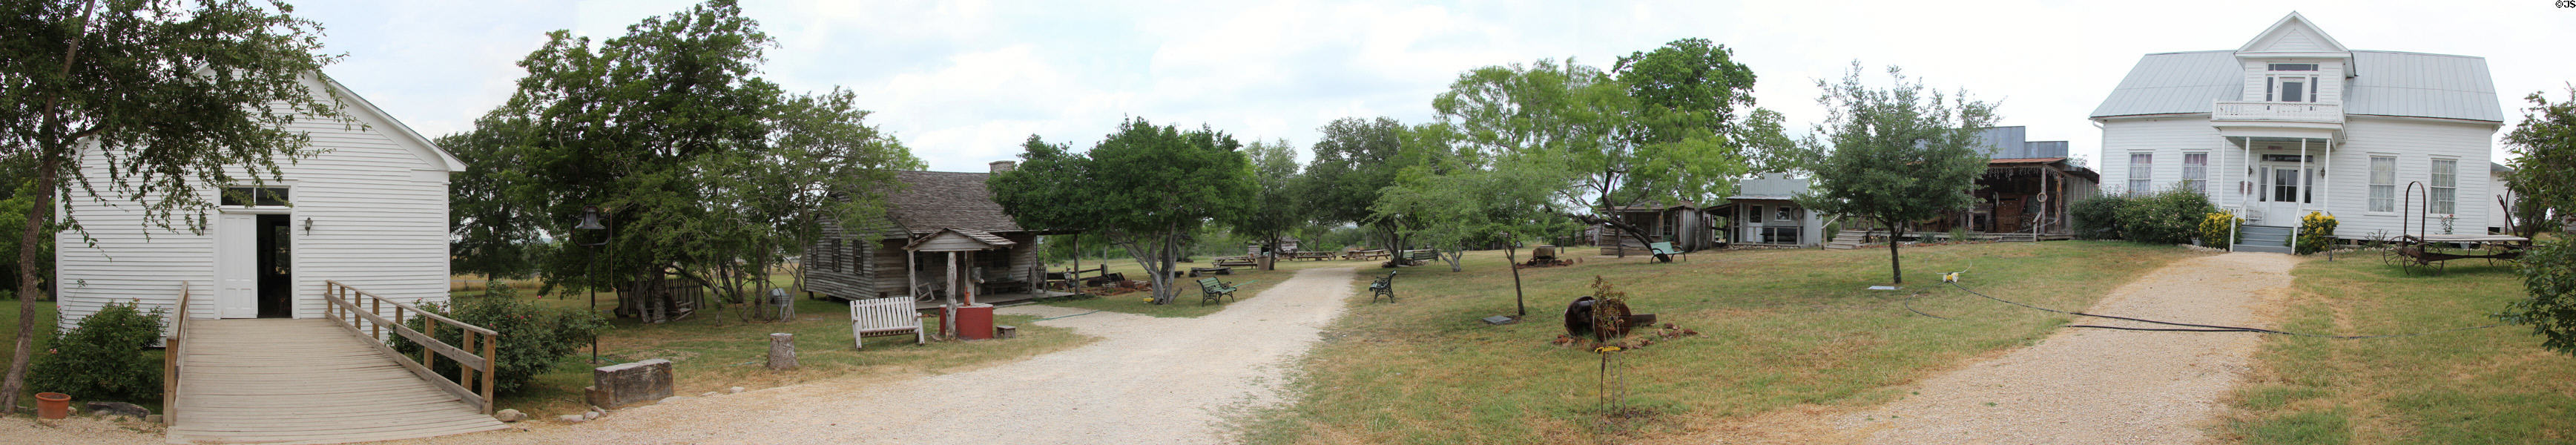 Panorama of Gonzales Pioneer Village Living History Center, a collection of 1800s structures. Gonzales, TX.